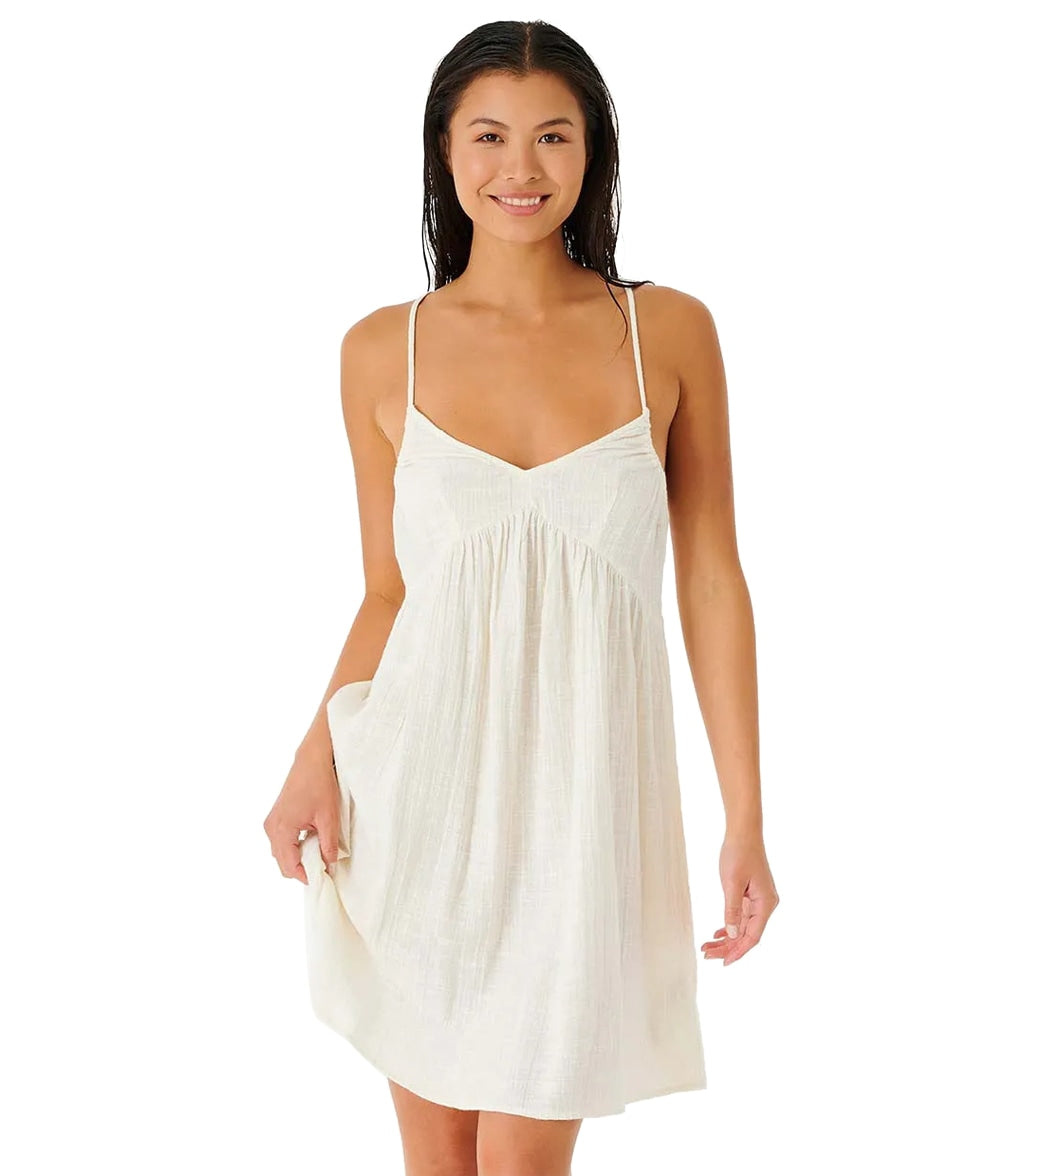 Rip Curl Women's Classic Surf Cover Up Dress at SwimOutlet.com